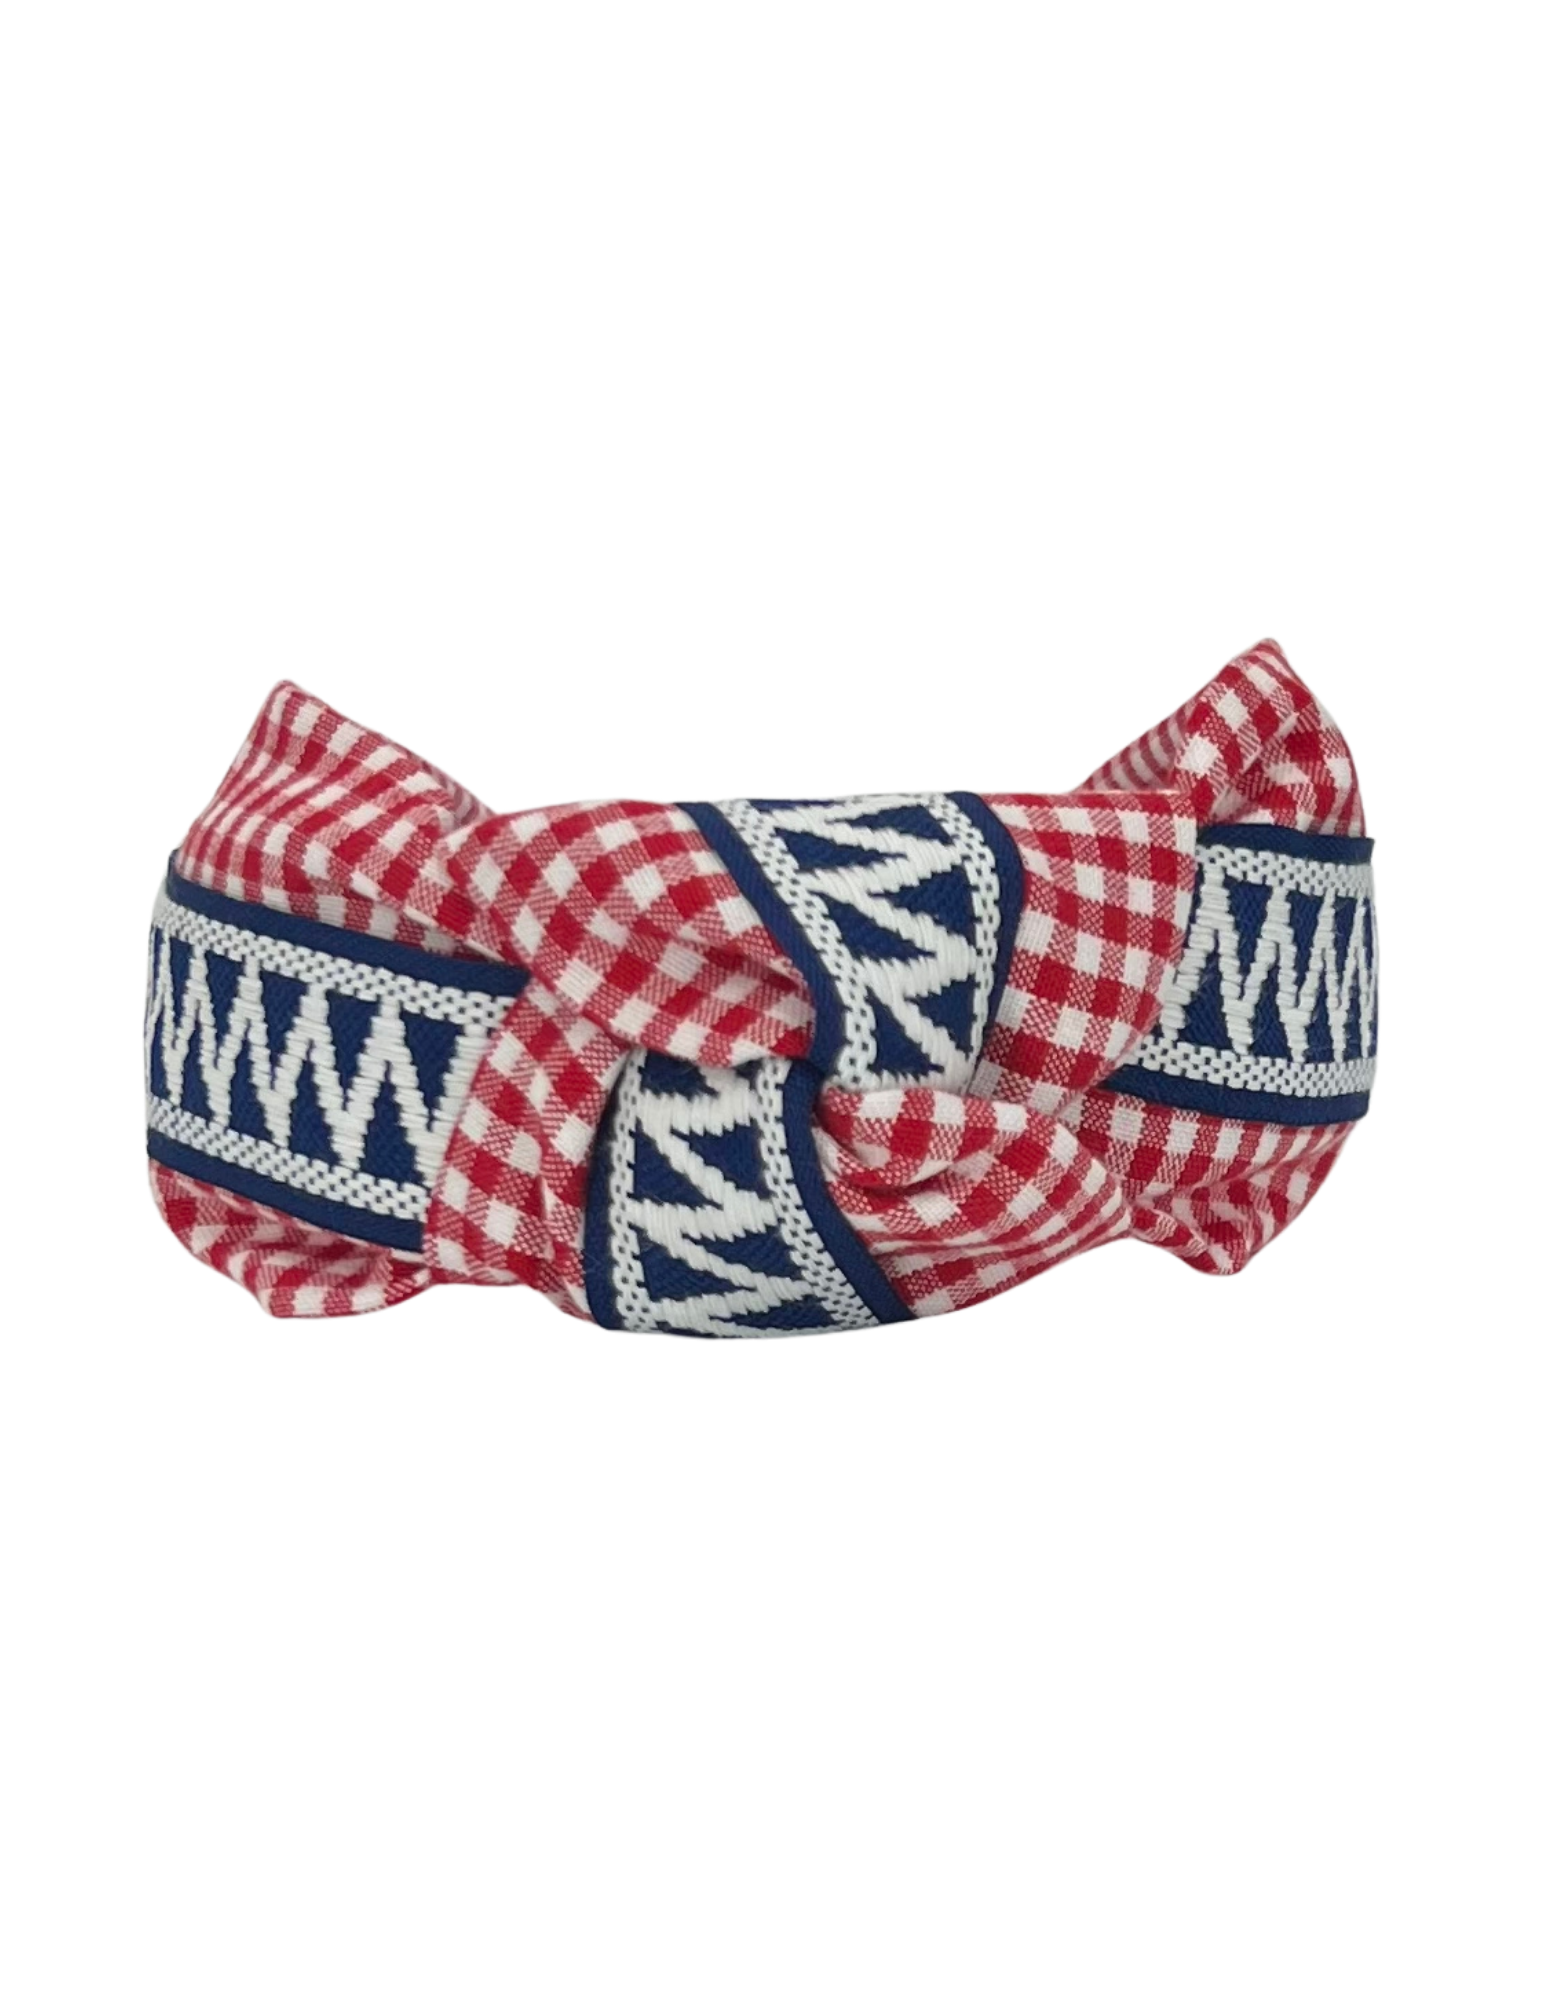 Navy and White Zigzag Ribbon on Red Gingham